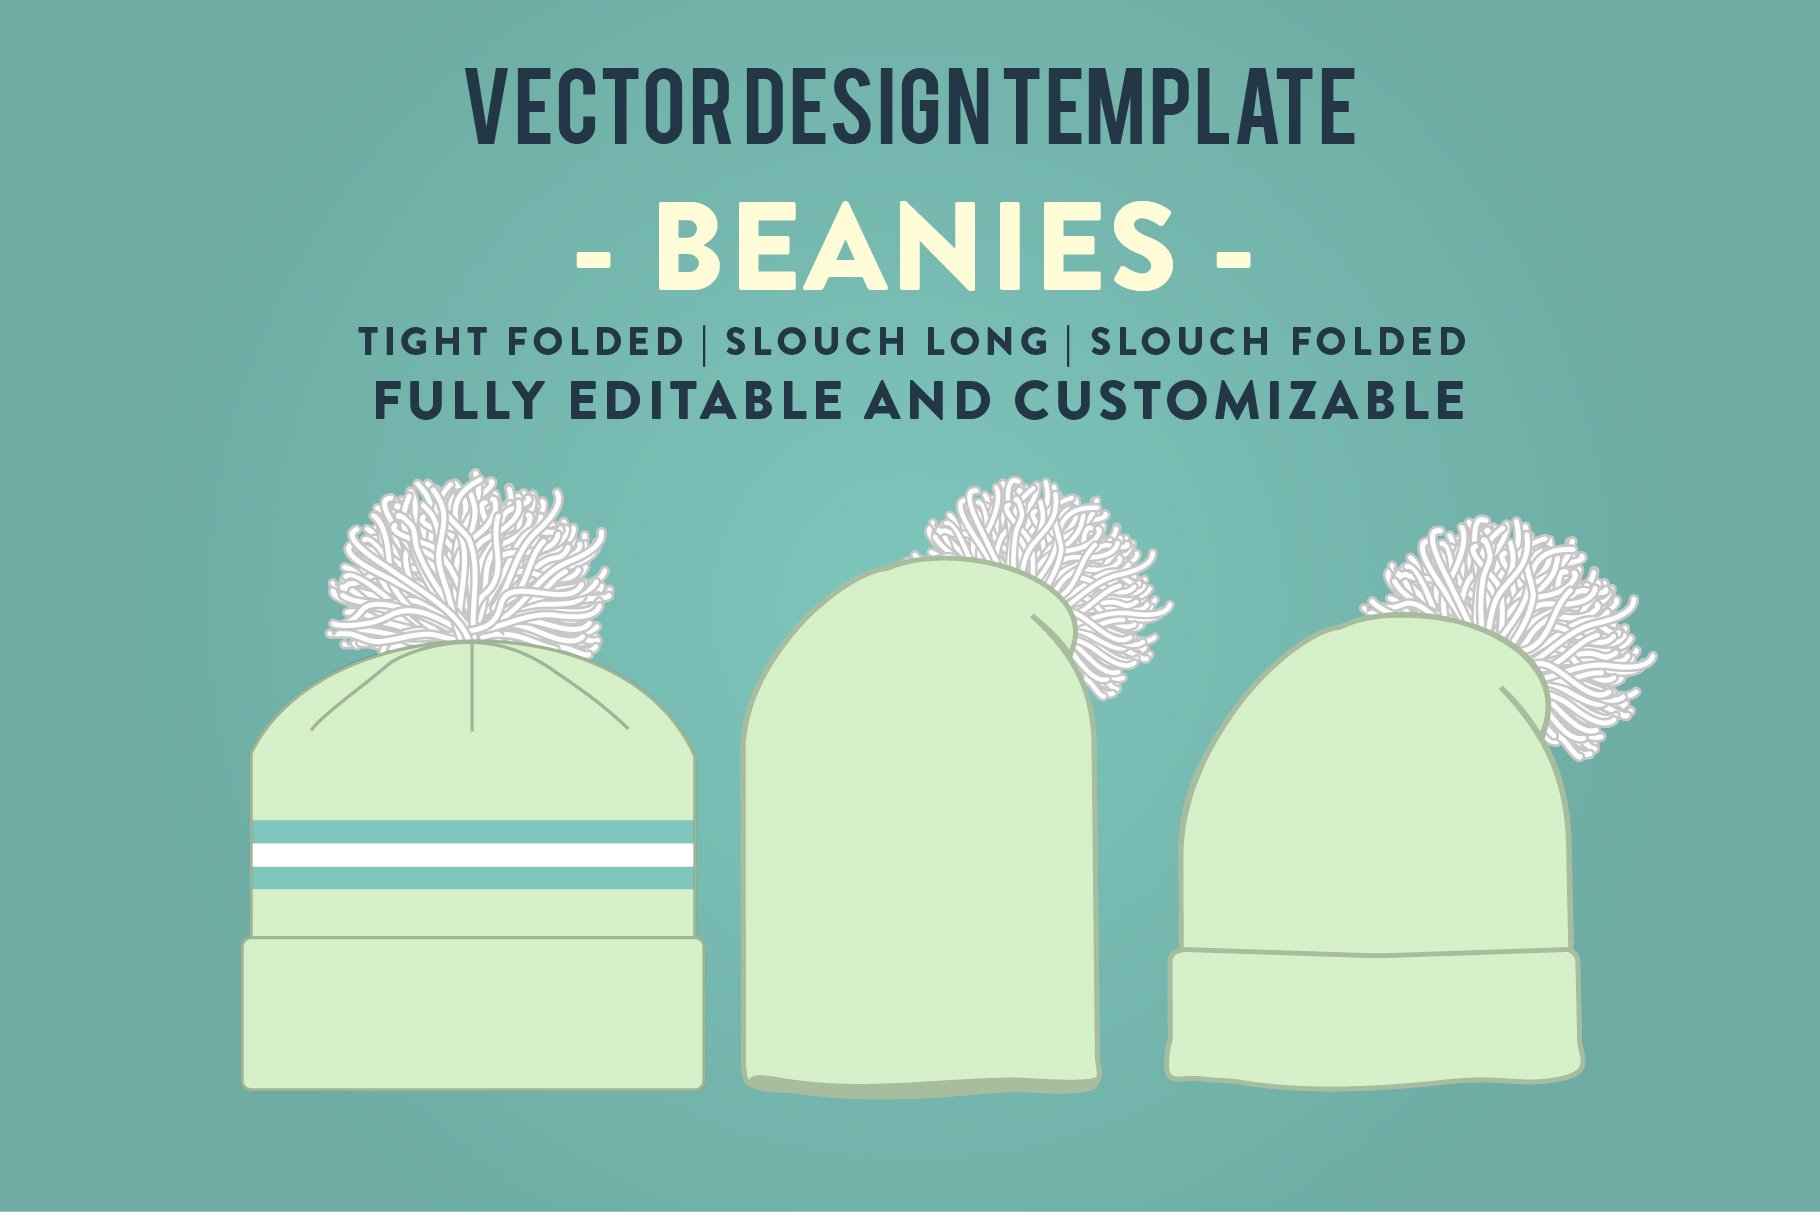 Hat Template - Beanies cover image.